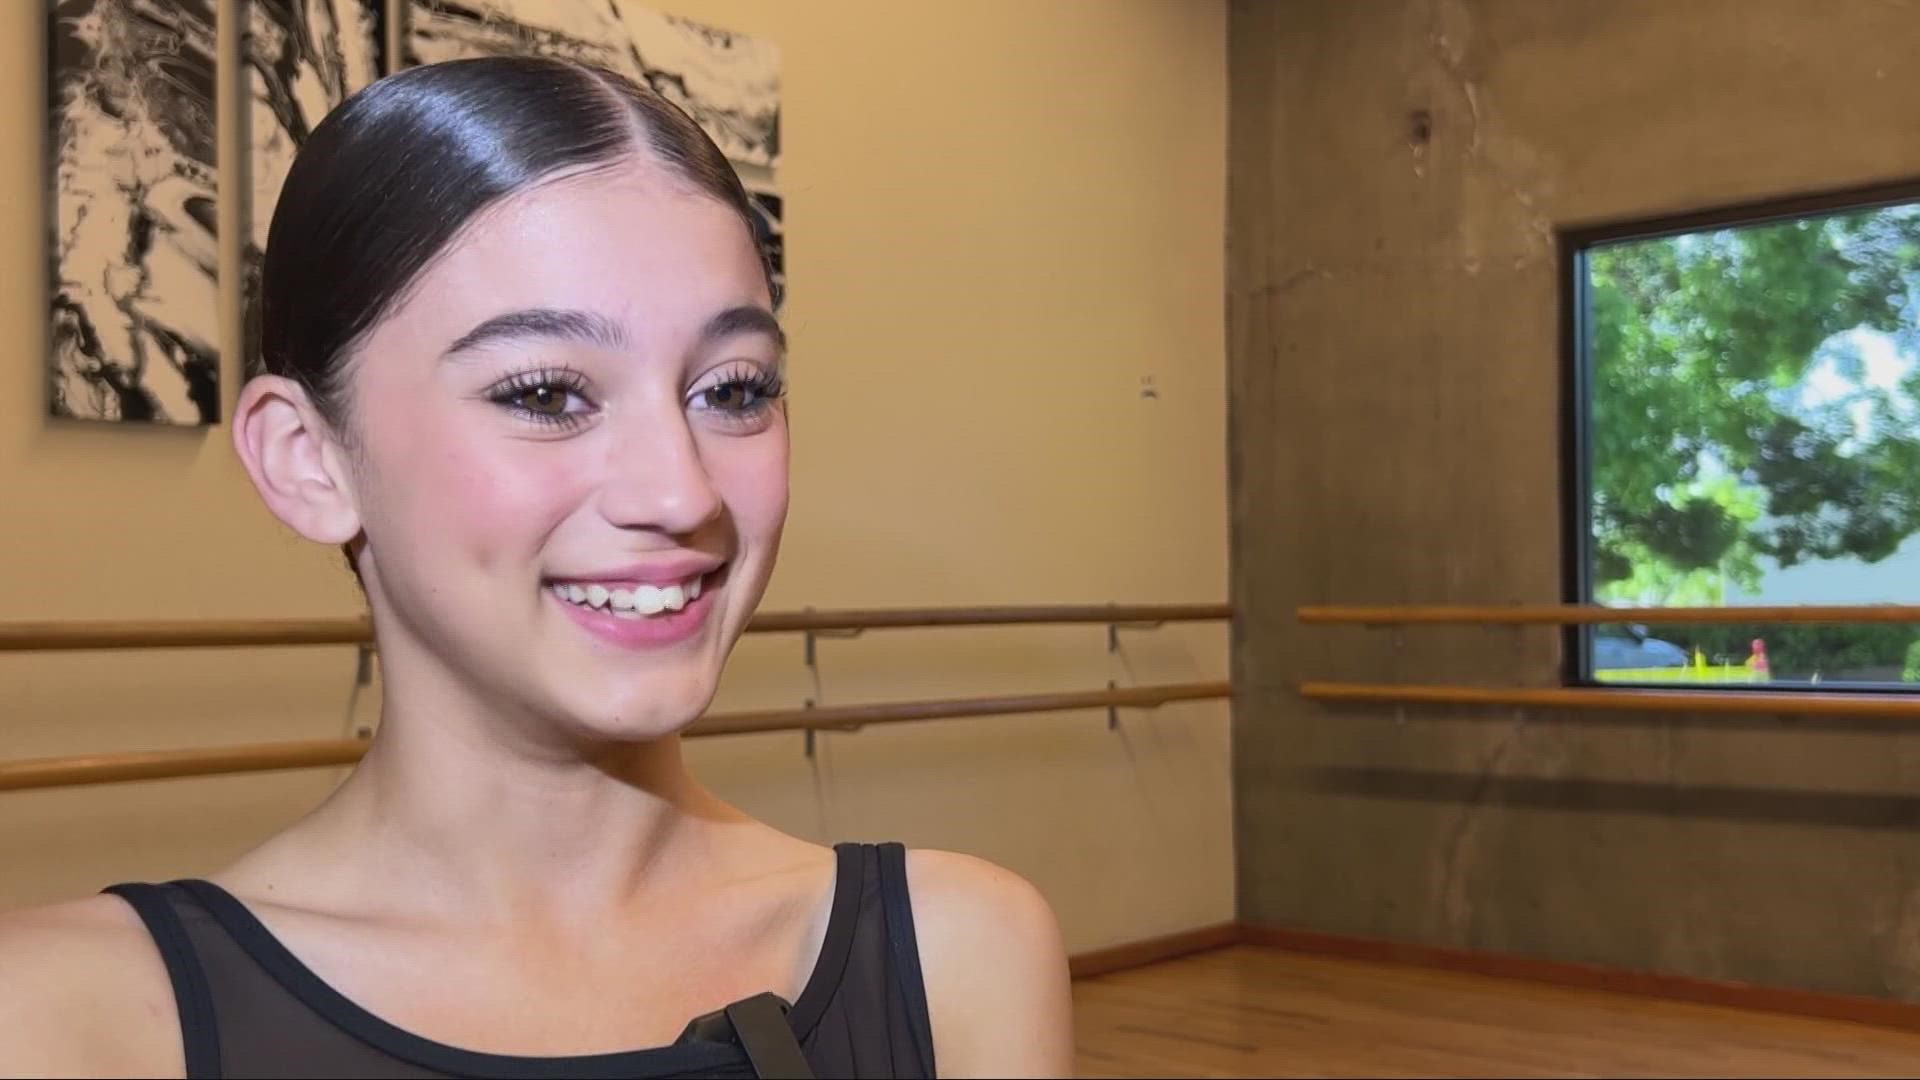 A 13-year-old from El Dorado Hills is getting ready to attend the renowned Joffrey Ballet School in New York City.